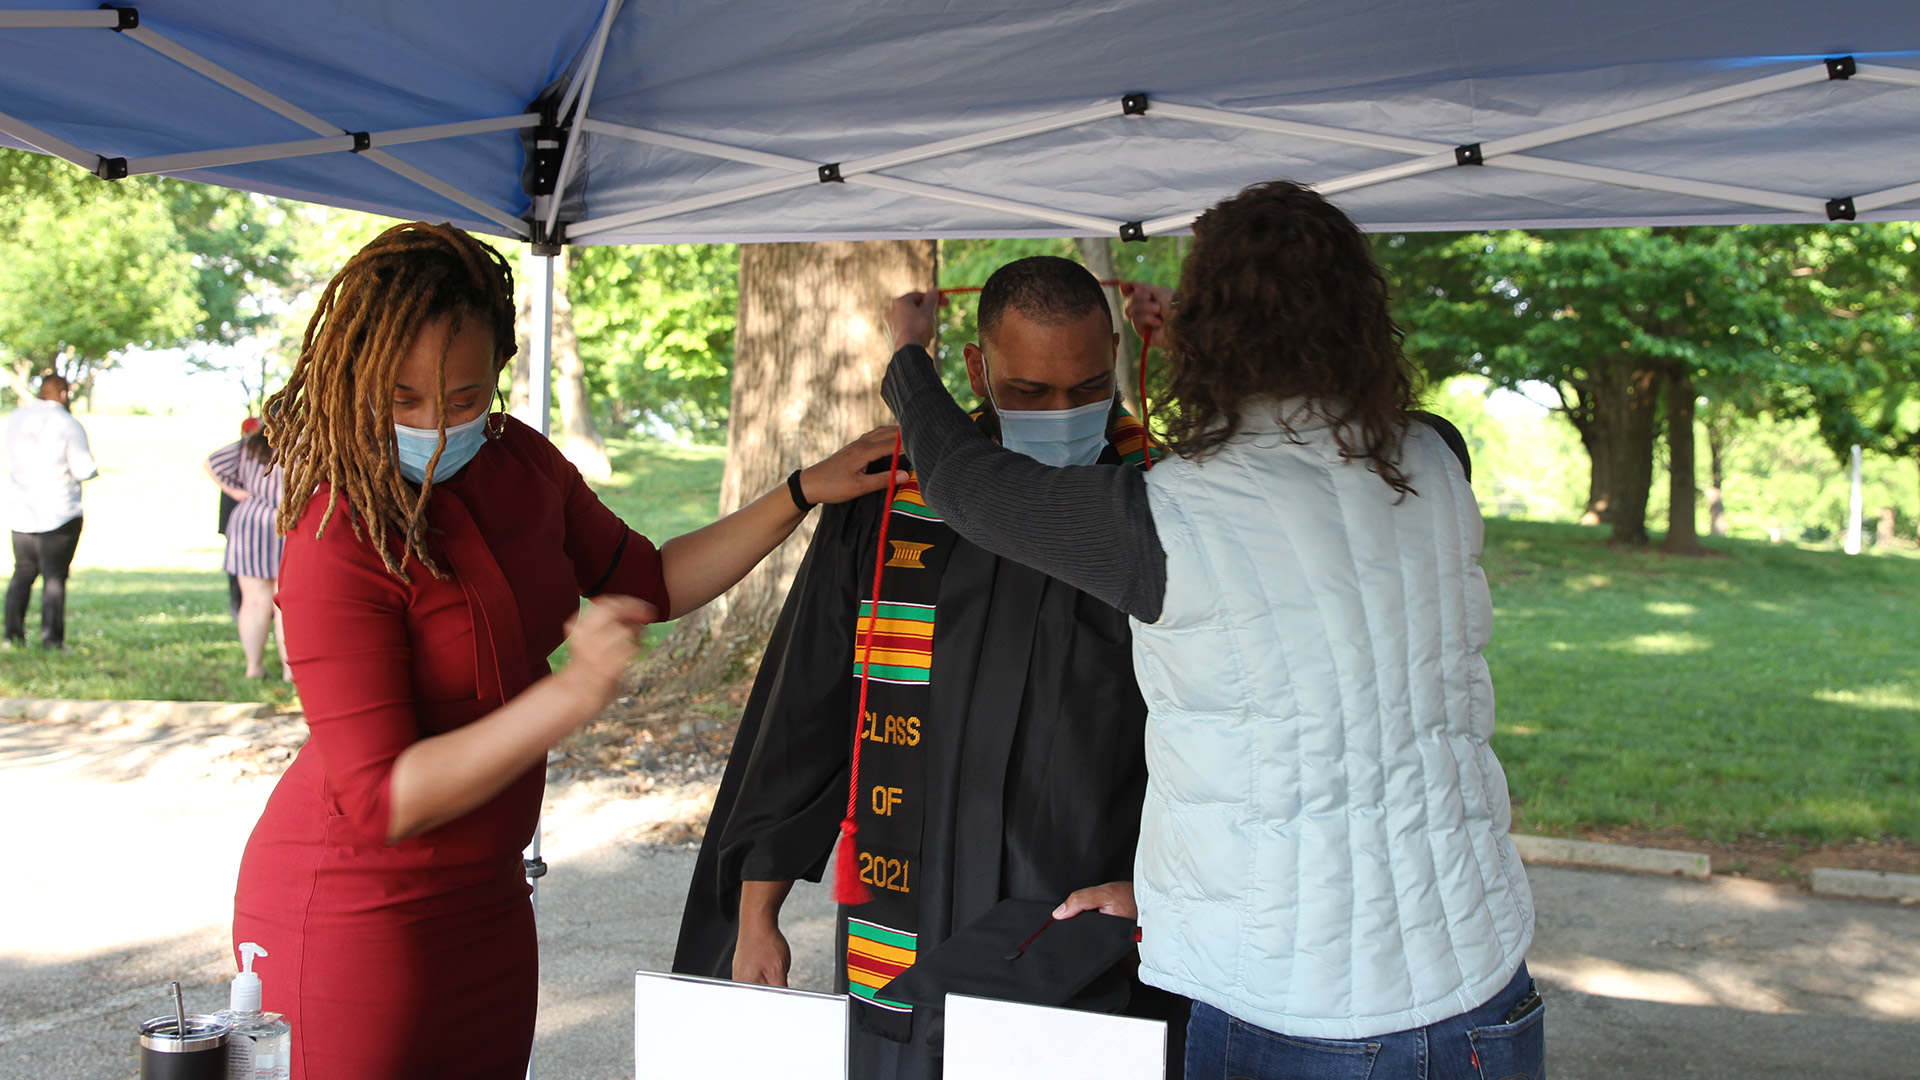 Commencement check-in was a time for checking stoles, cords, and ribbons.